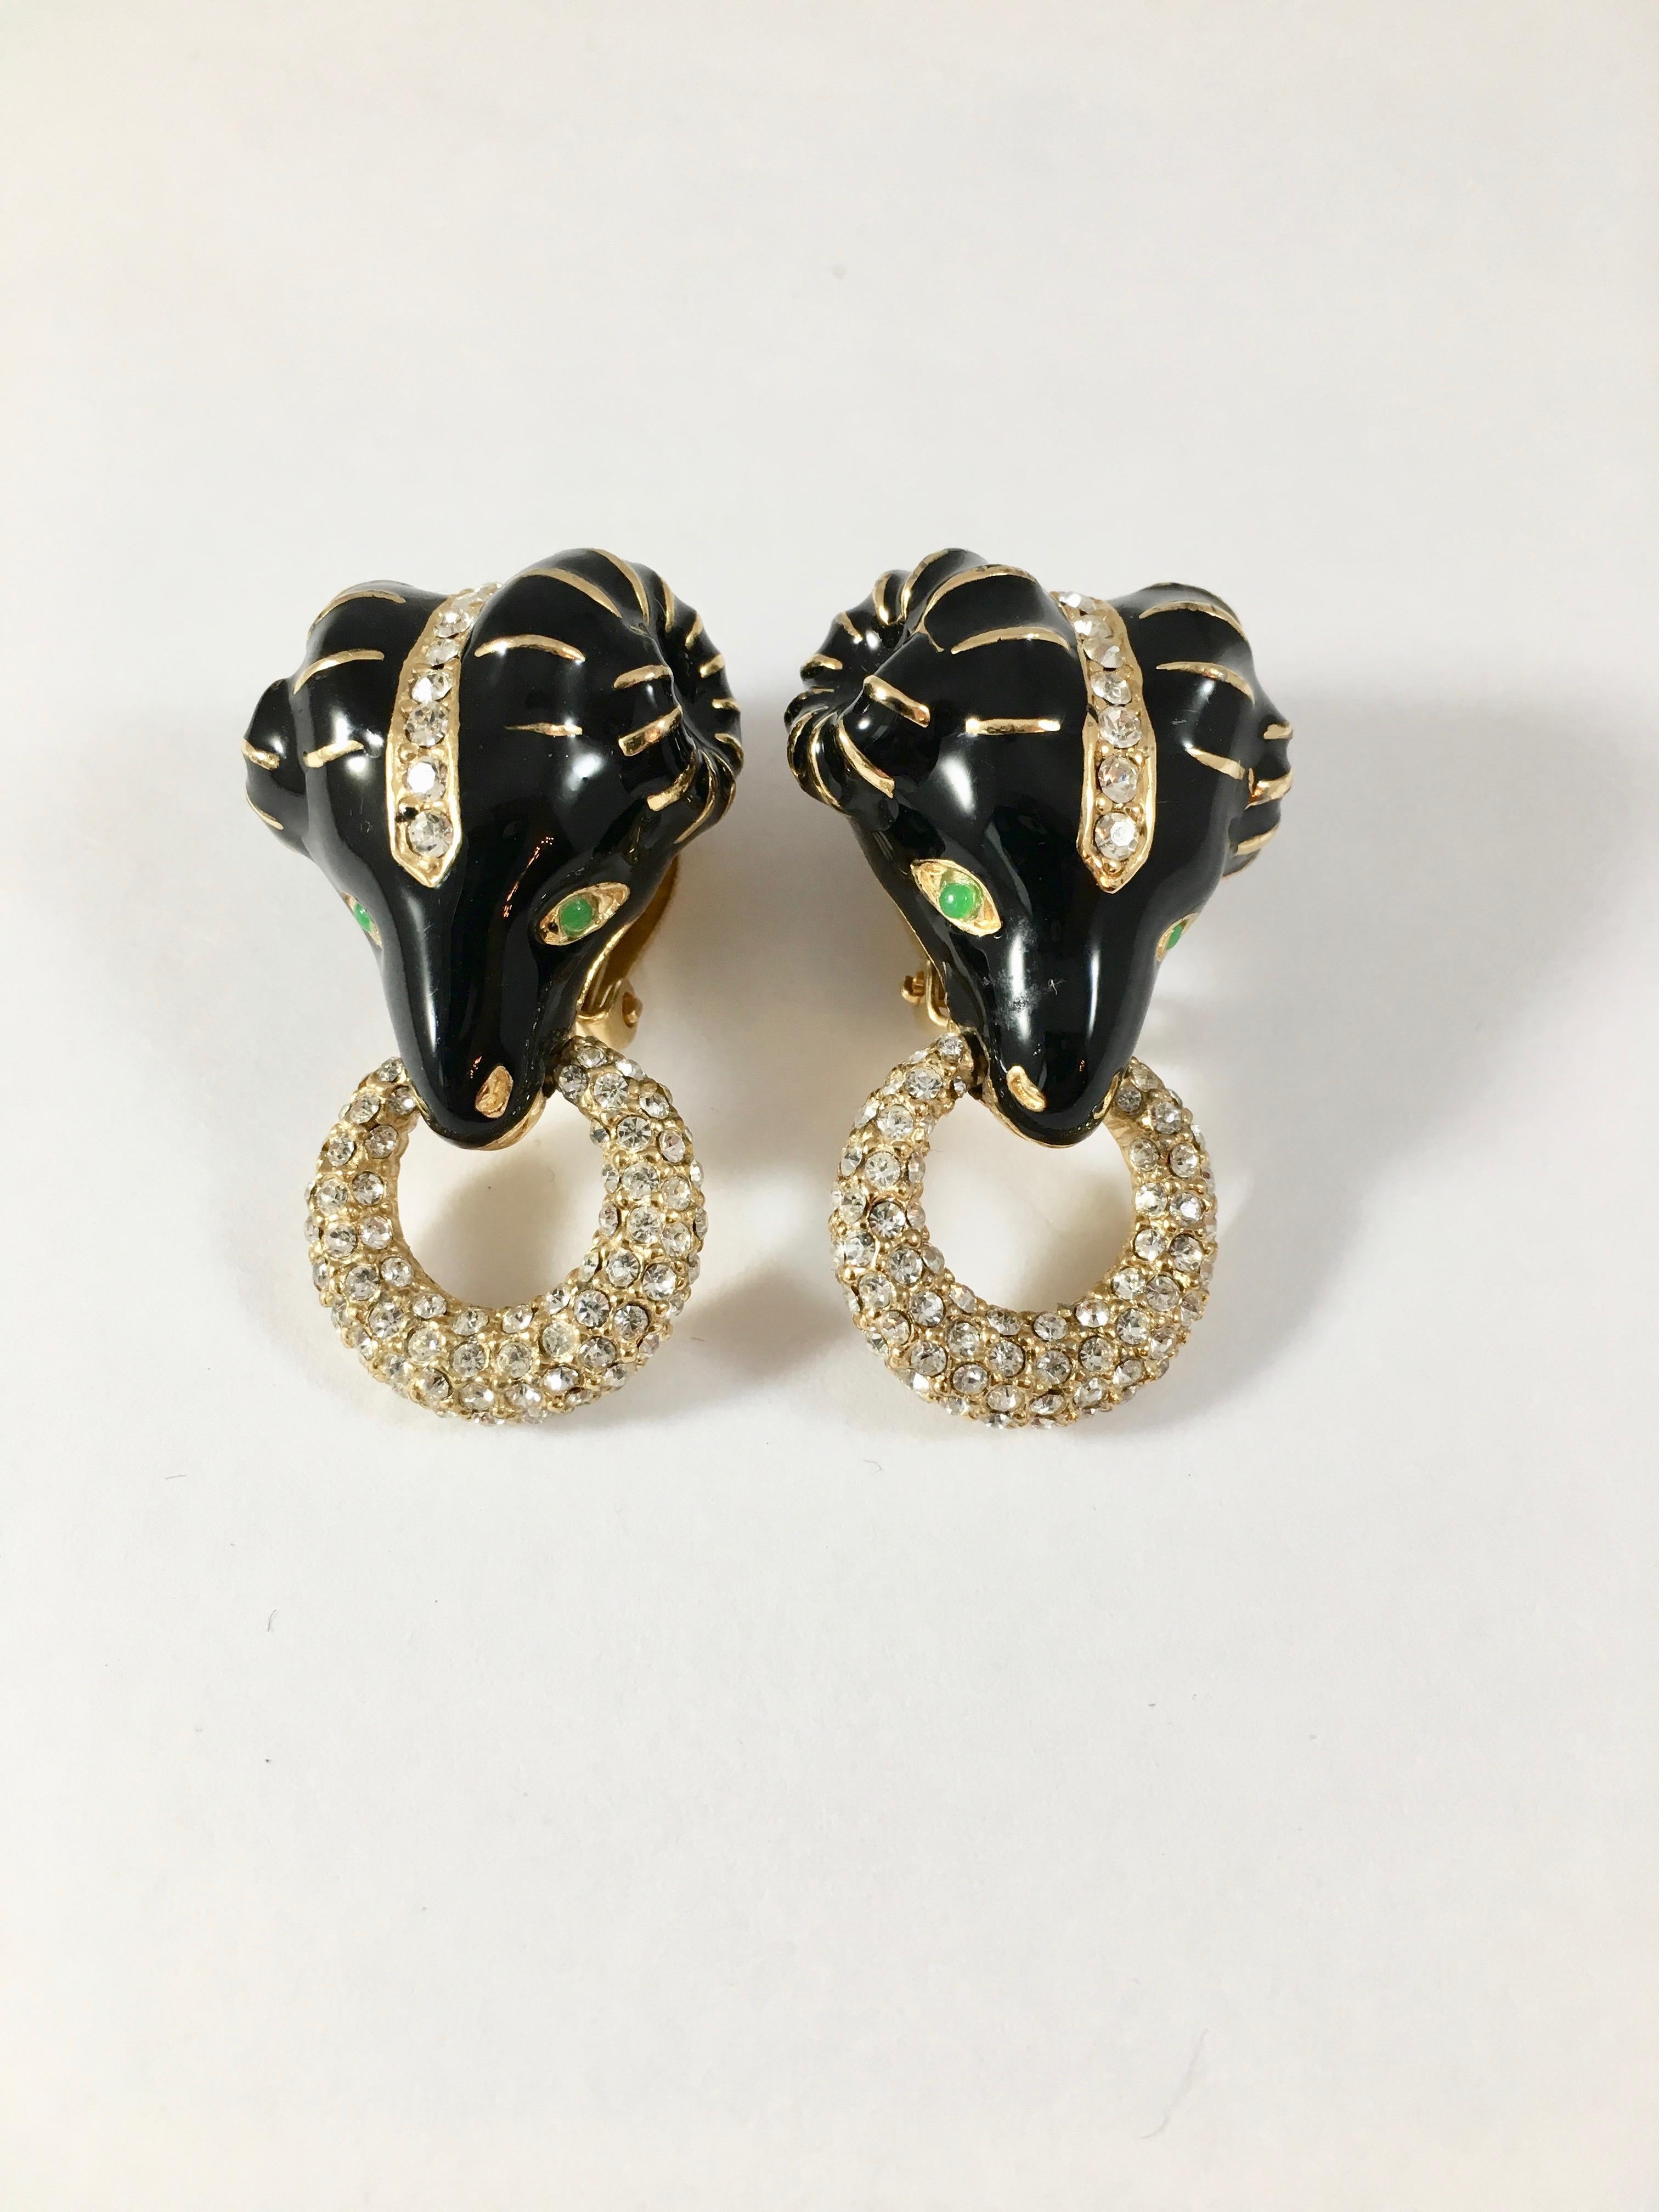 This is a pair of 1980s Ciner rams head clip-on earrings. They are covered in black enamel and have green glass eyes and clear rhinestones imbedded in their heads. Each ram has a ring covered in clear rhinestones in their mouths. They are marked